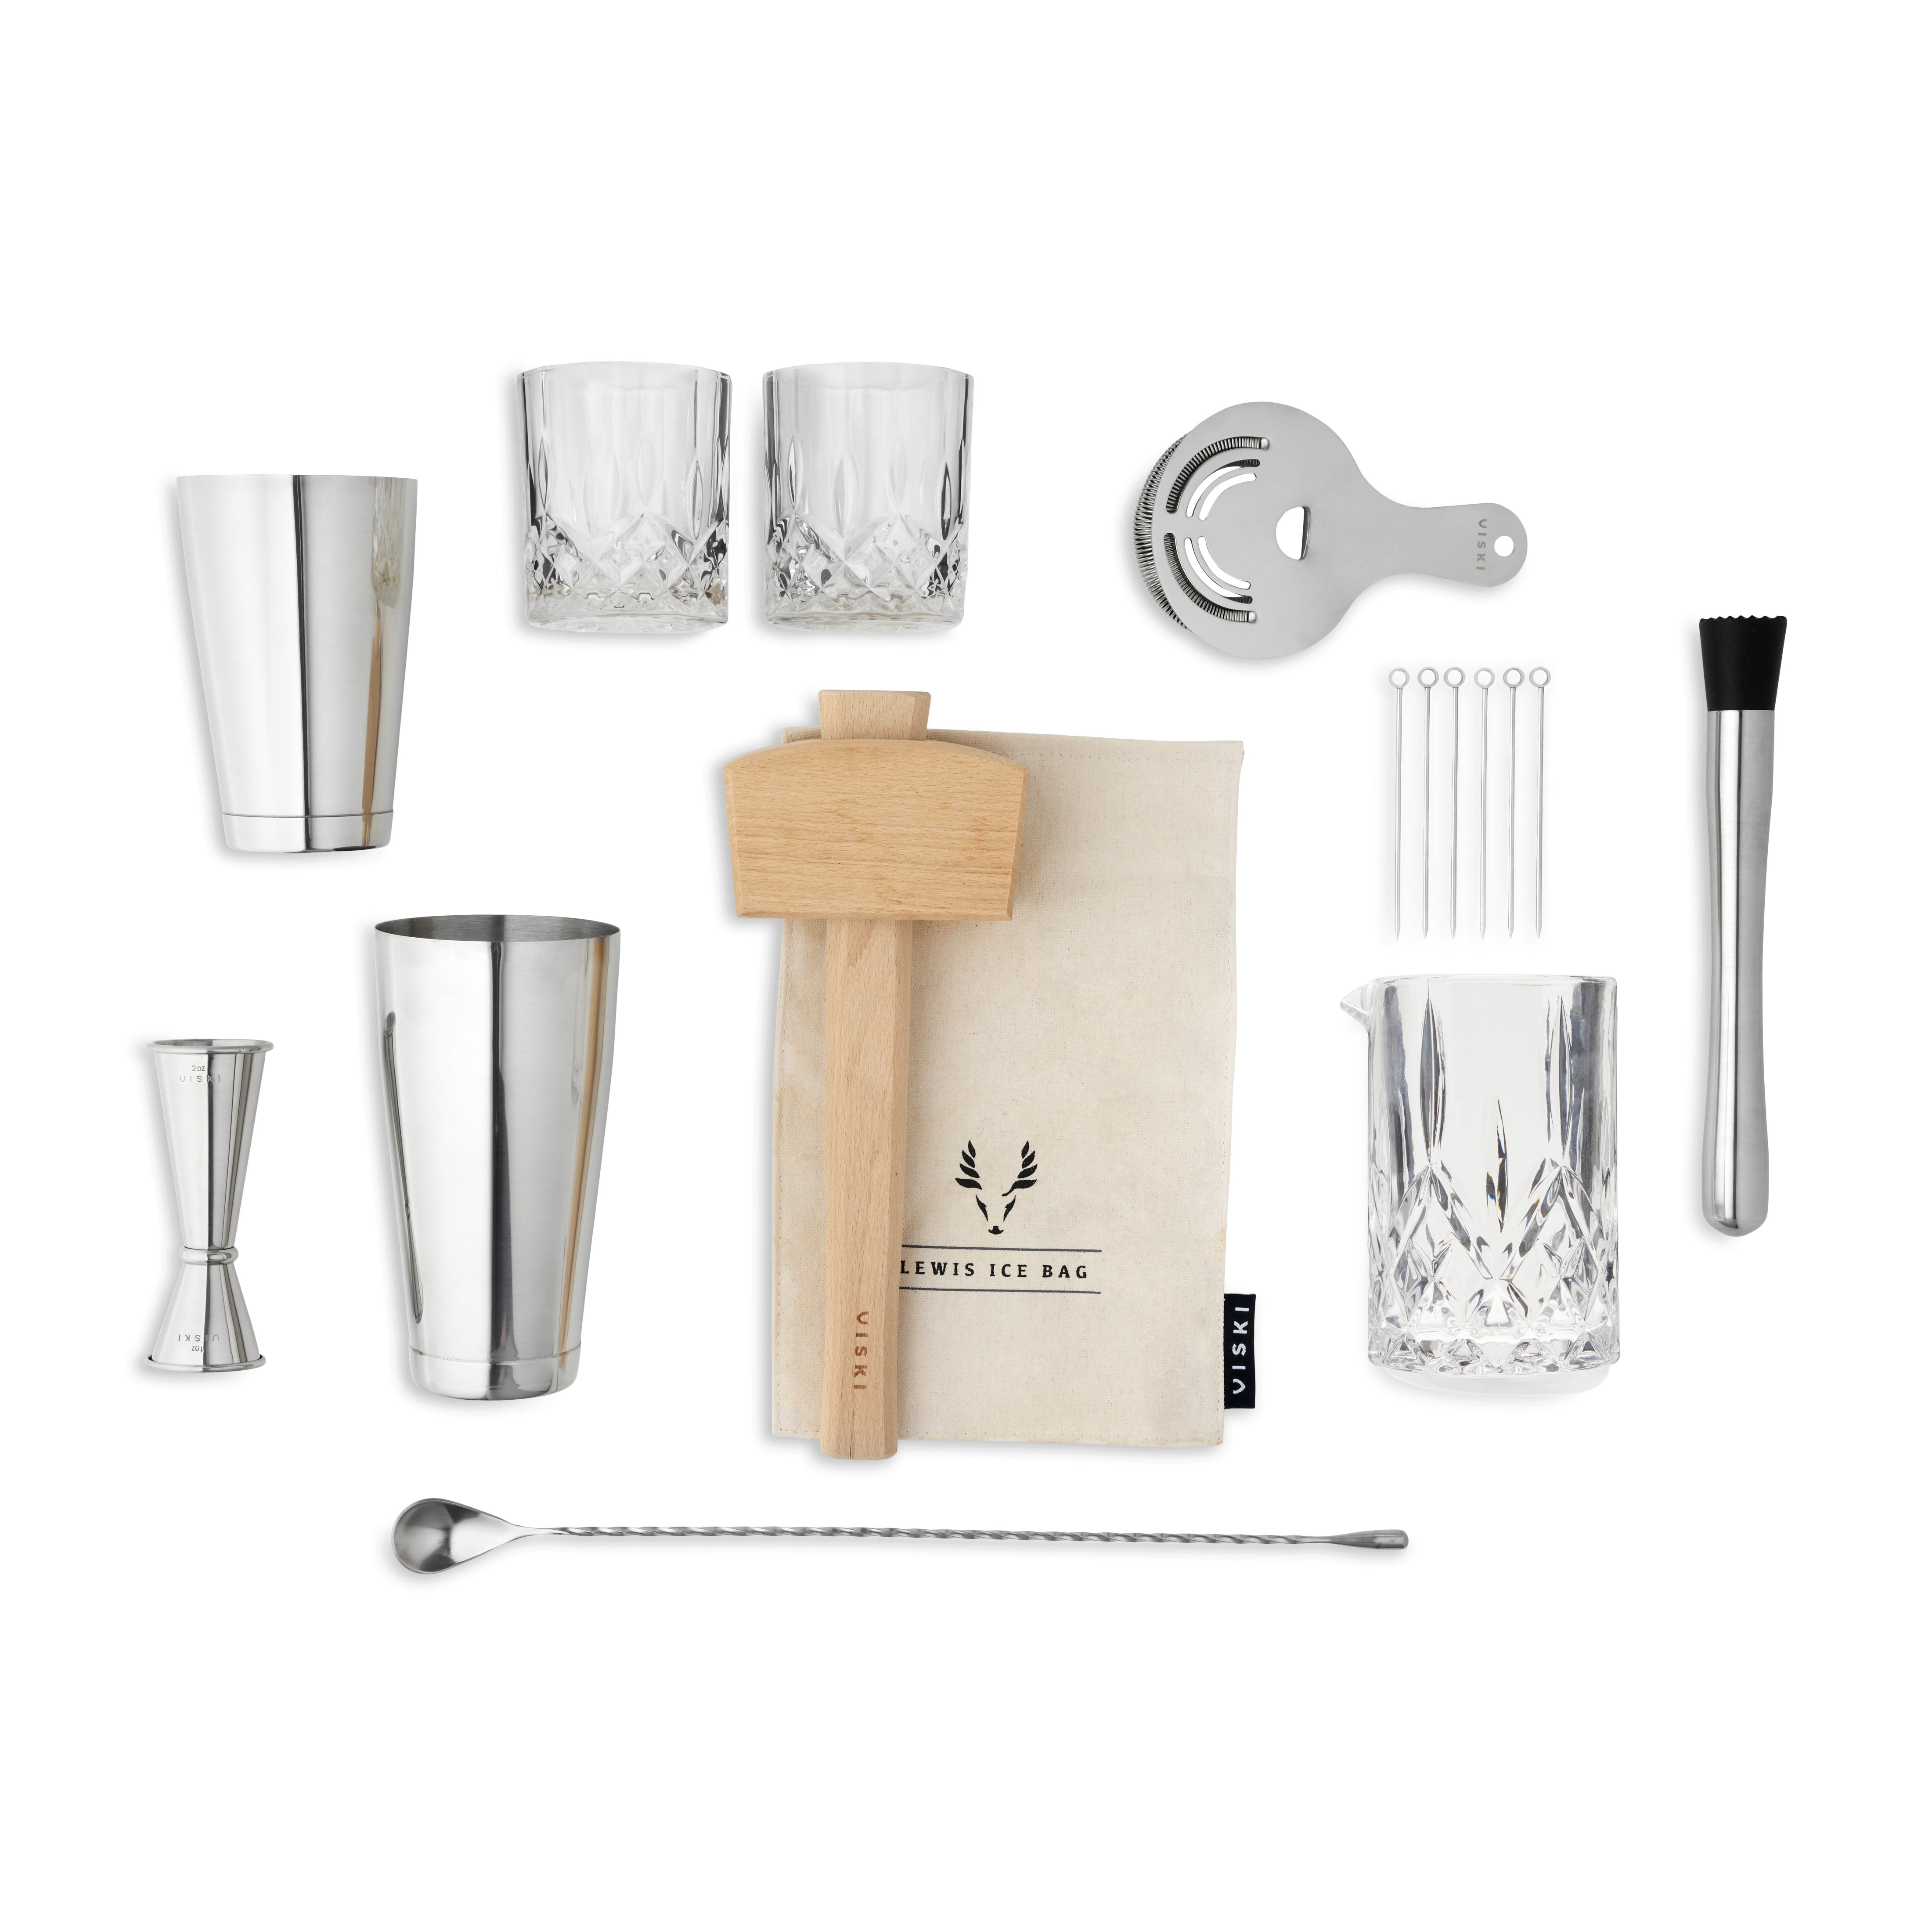  Mixology Bartender Kit: 14-Piece Cocktail Shaker Set - Bar Tool  Set For Home and Professional Bartending - Martini Shaker Set with Drink  Mixing Bar Tools - Exclusive Cocktail Picks and Recipes